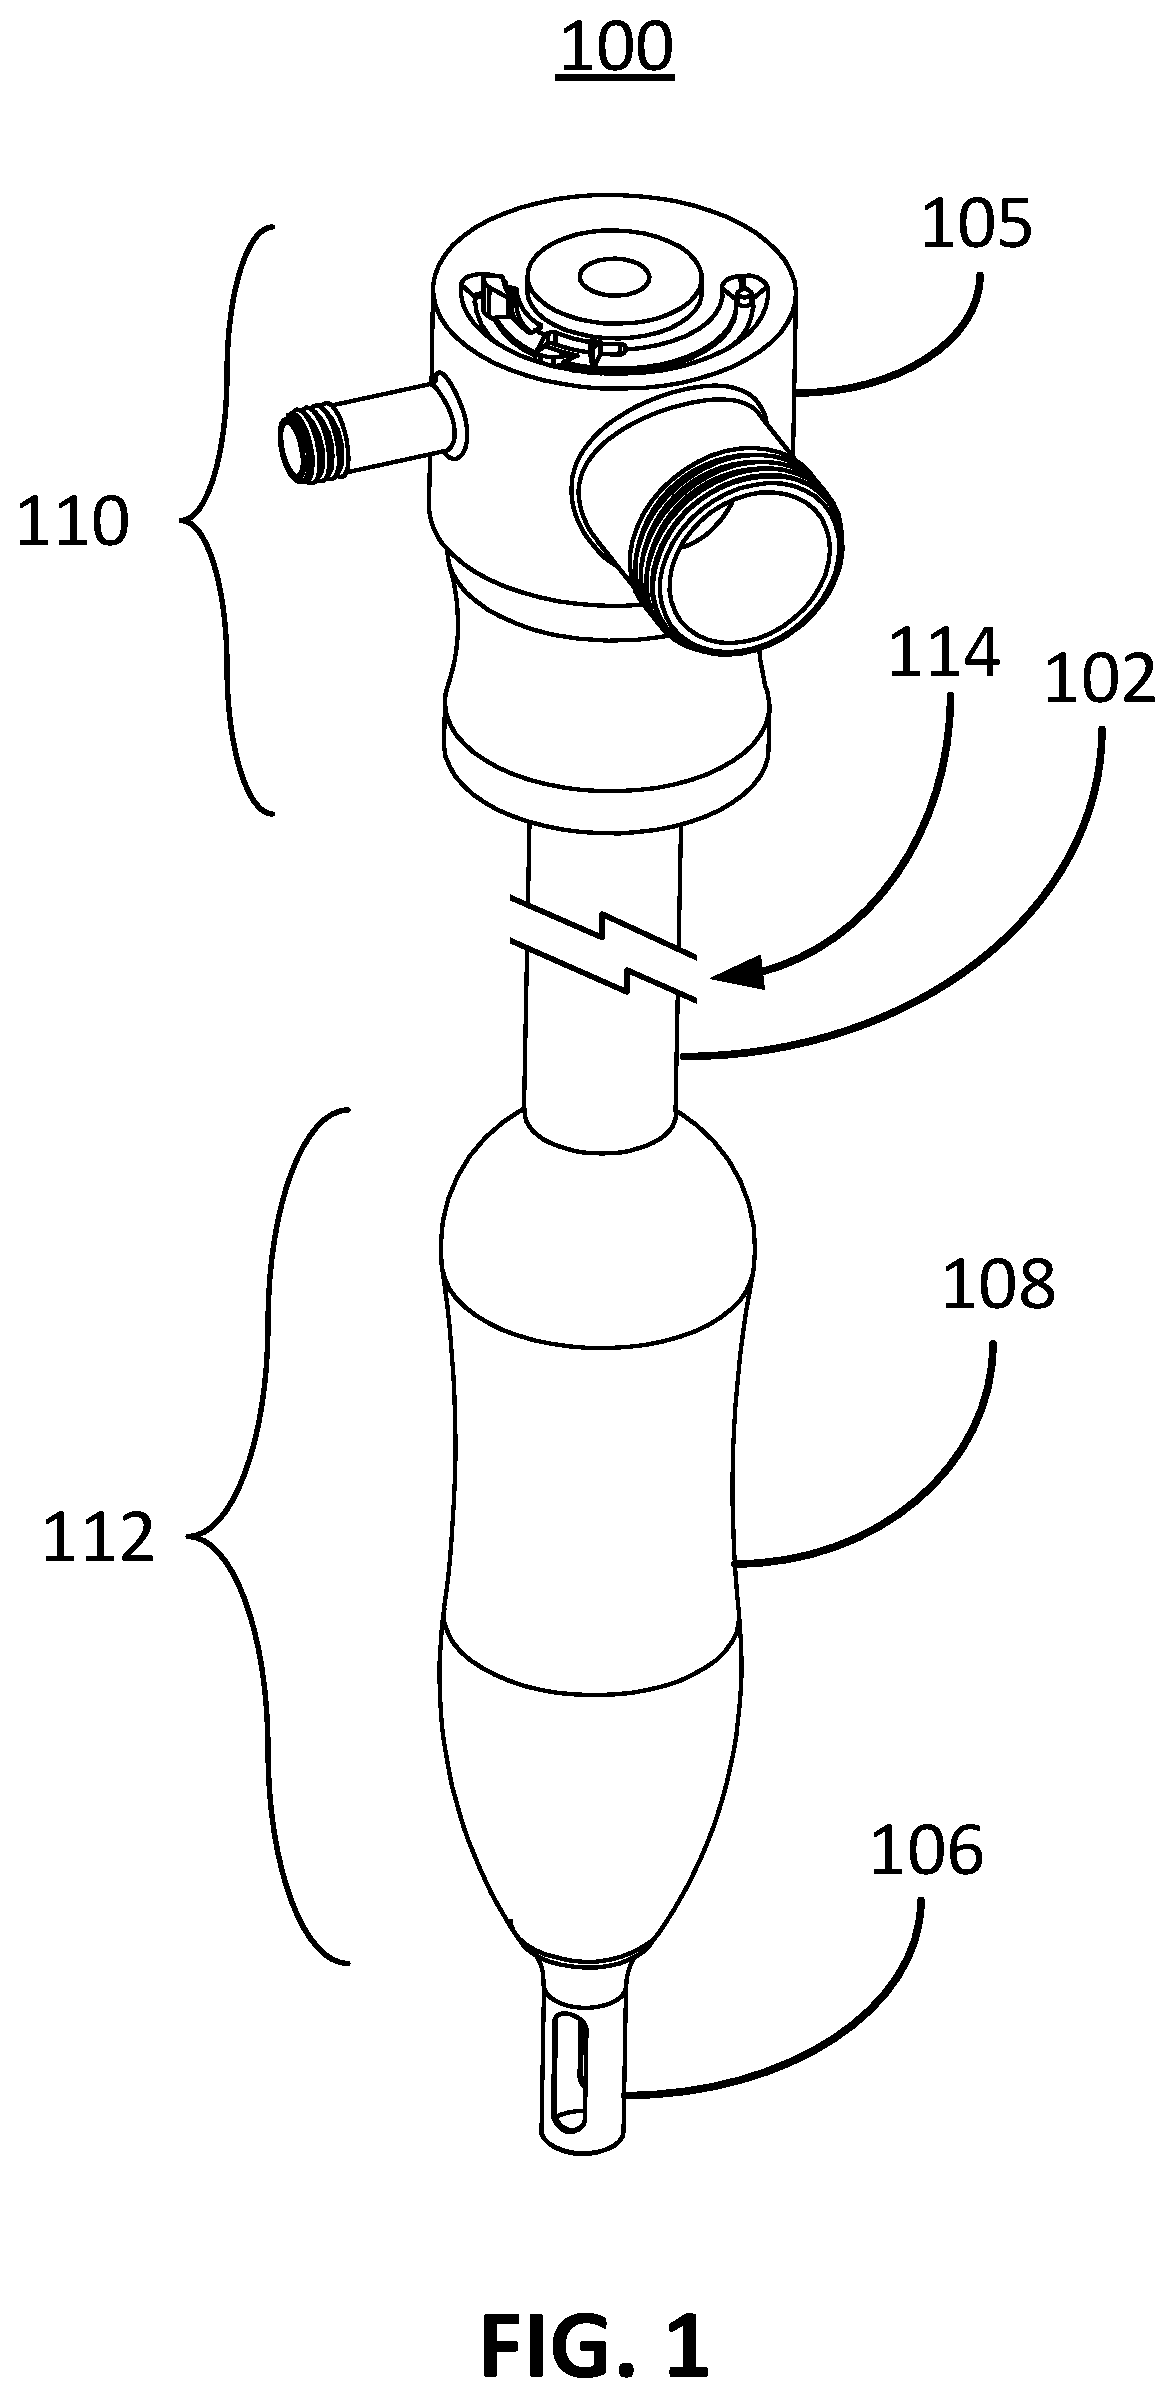 Endotracheal tube assembly